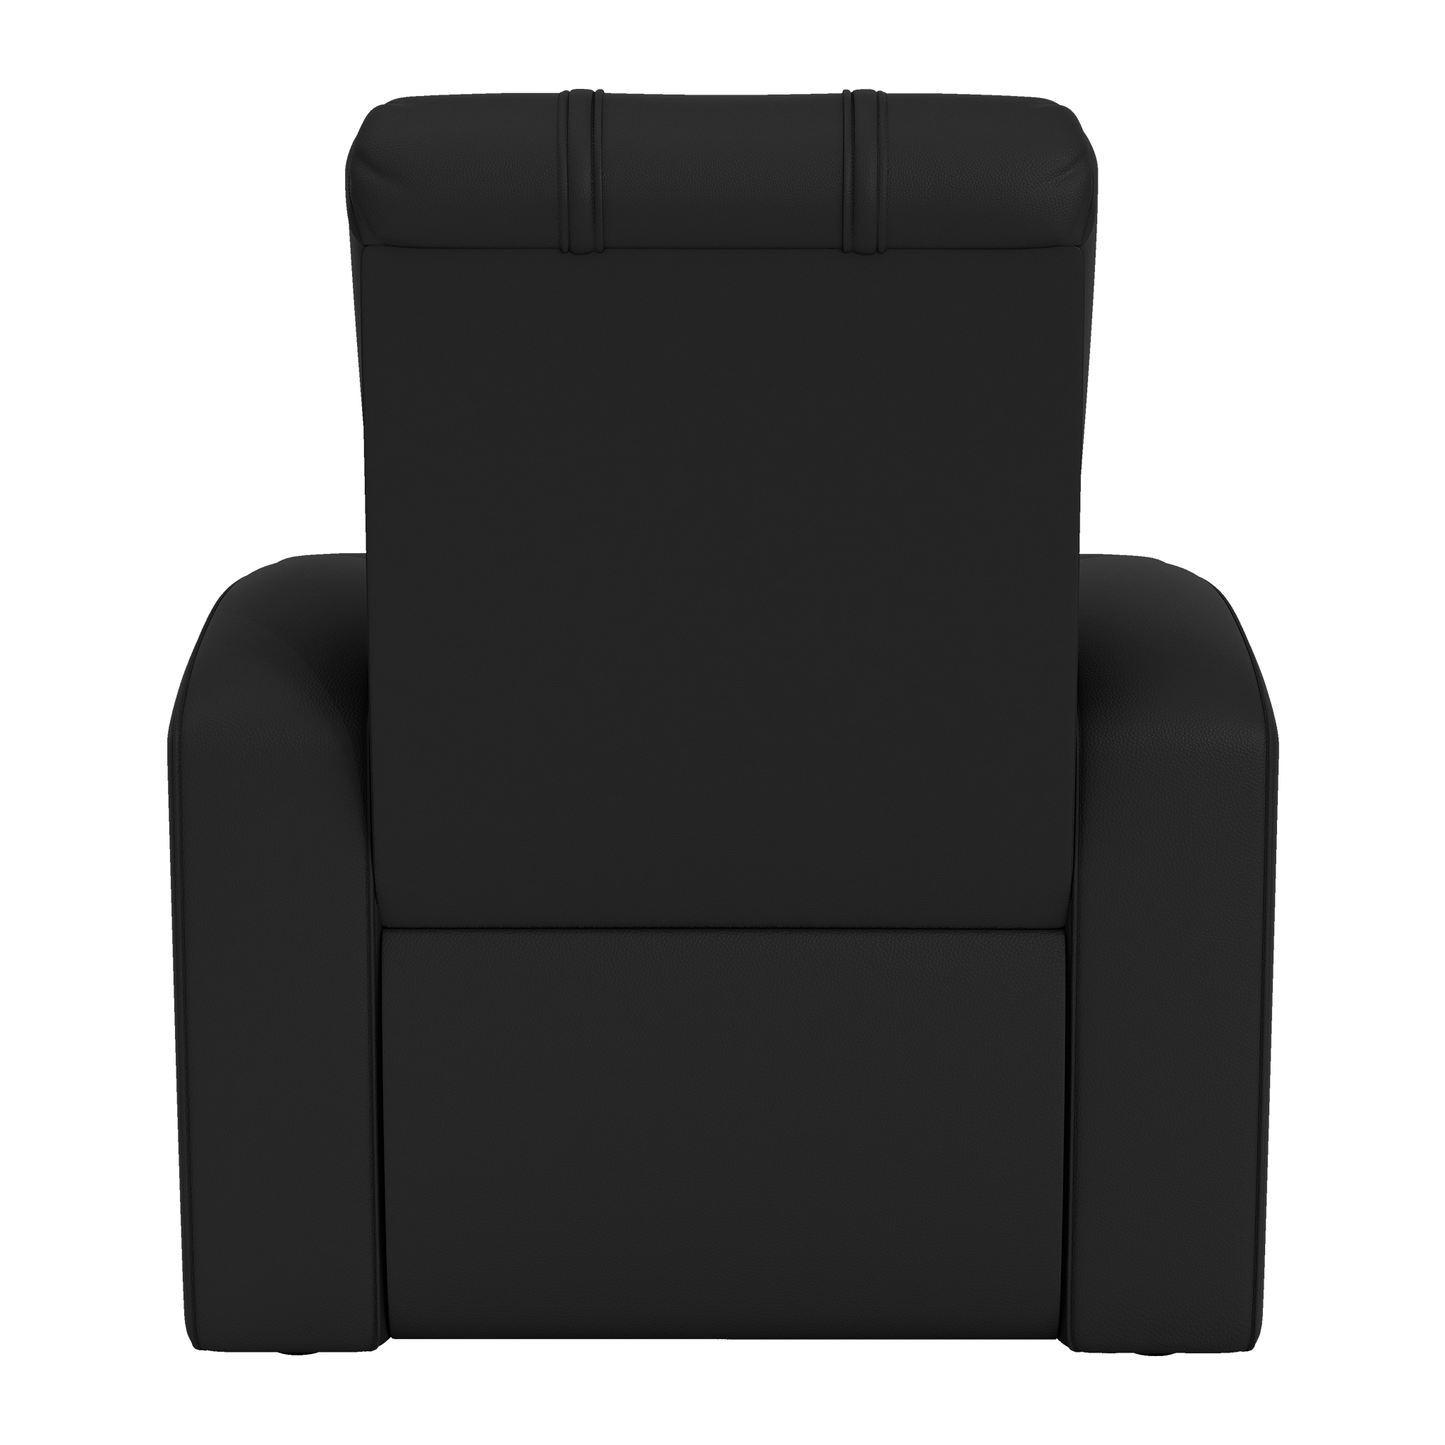 Relax Home Theater Recliner with Illinois Fighting Illini Logo